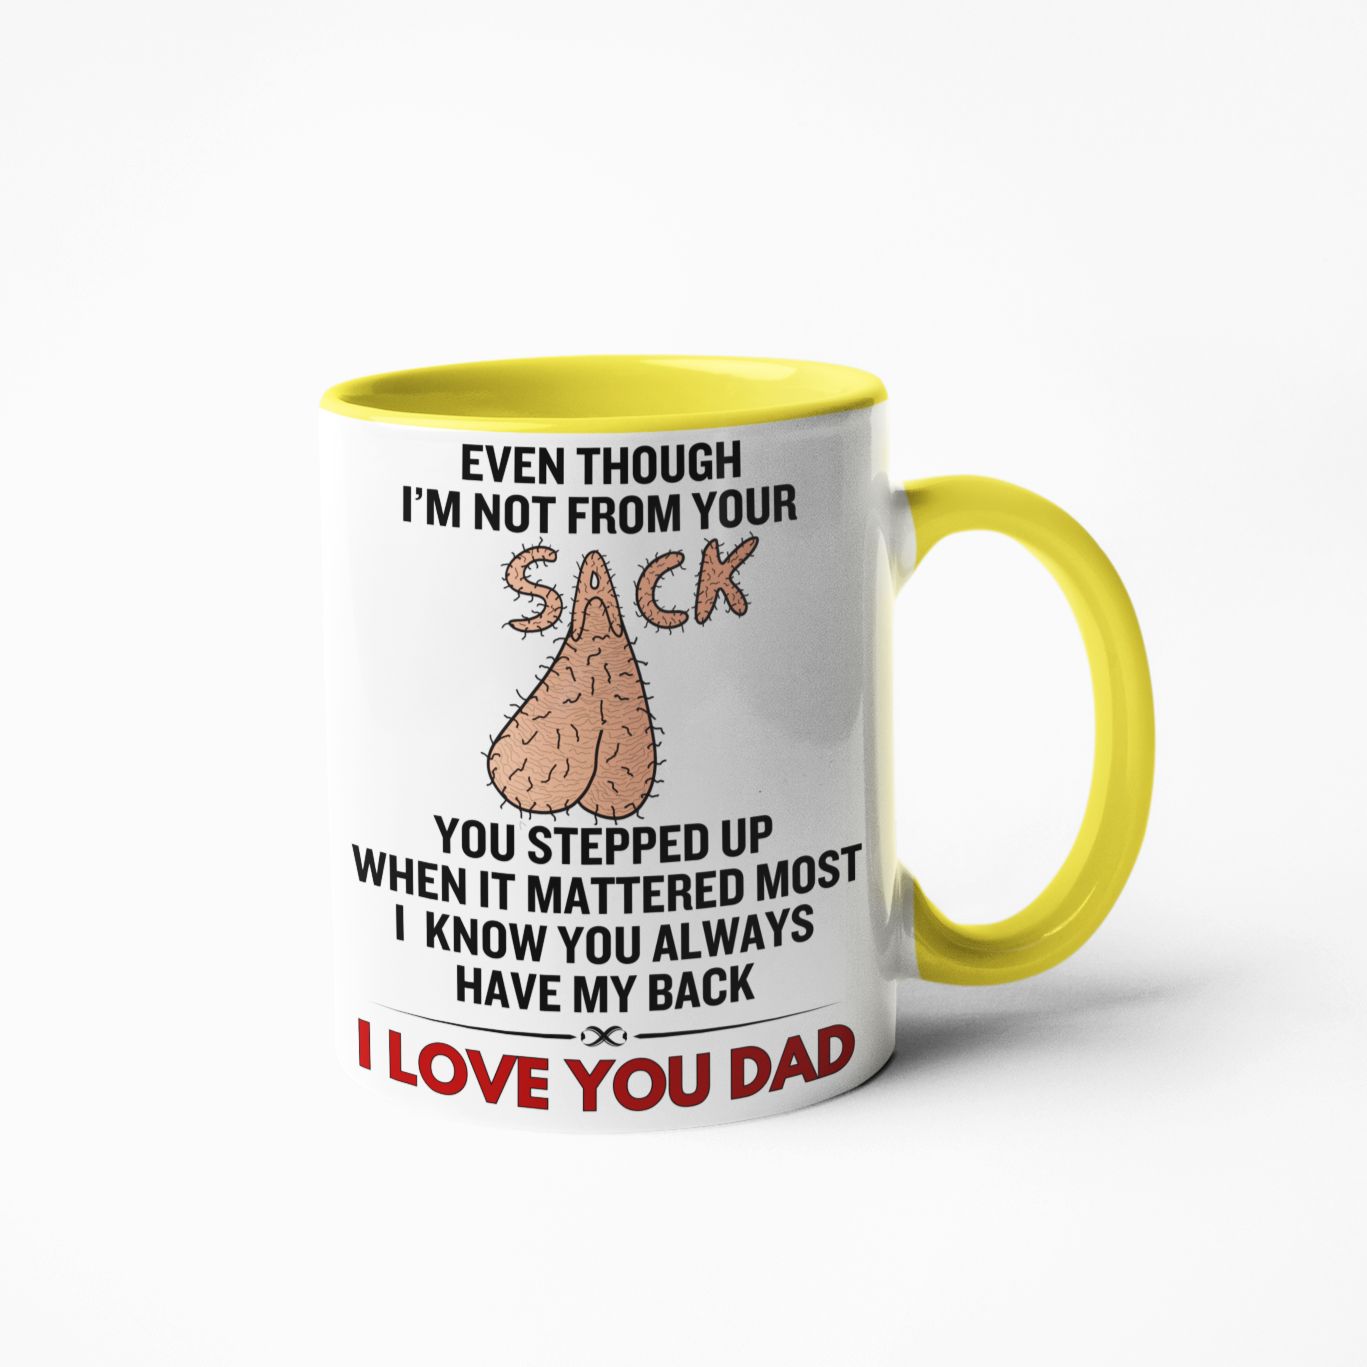 Show your stepdad some appreciation with this fun and unique Step Dad Rude Funny Coffee Mug. It's perfect for a morning cup of coffee or tea, making it a great gift for any occasion. Enjoy the perfect brew in a stylish, humorous mug!